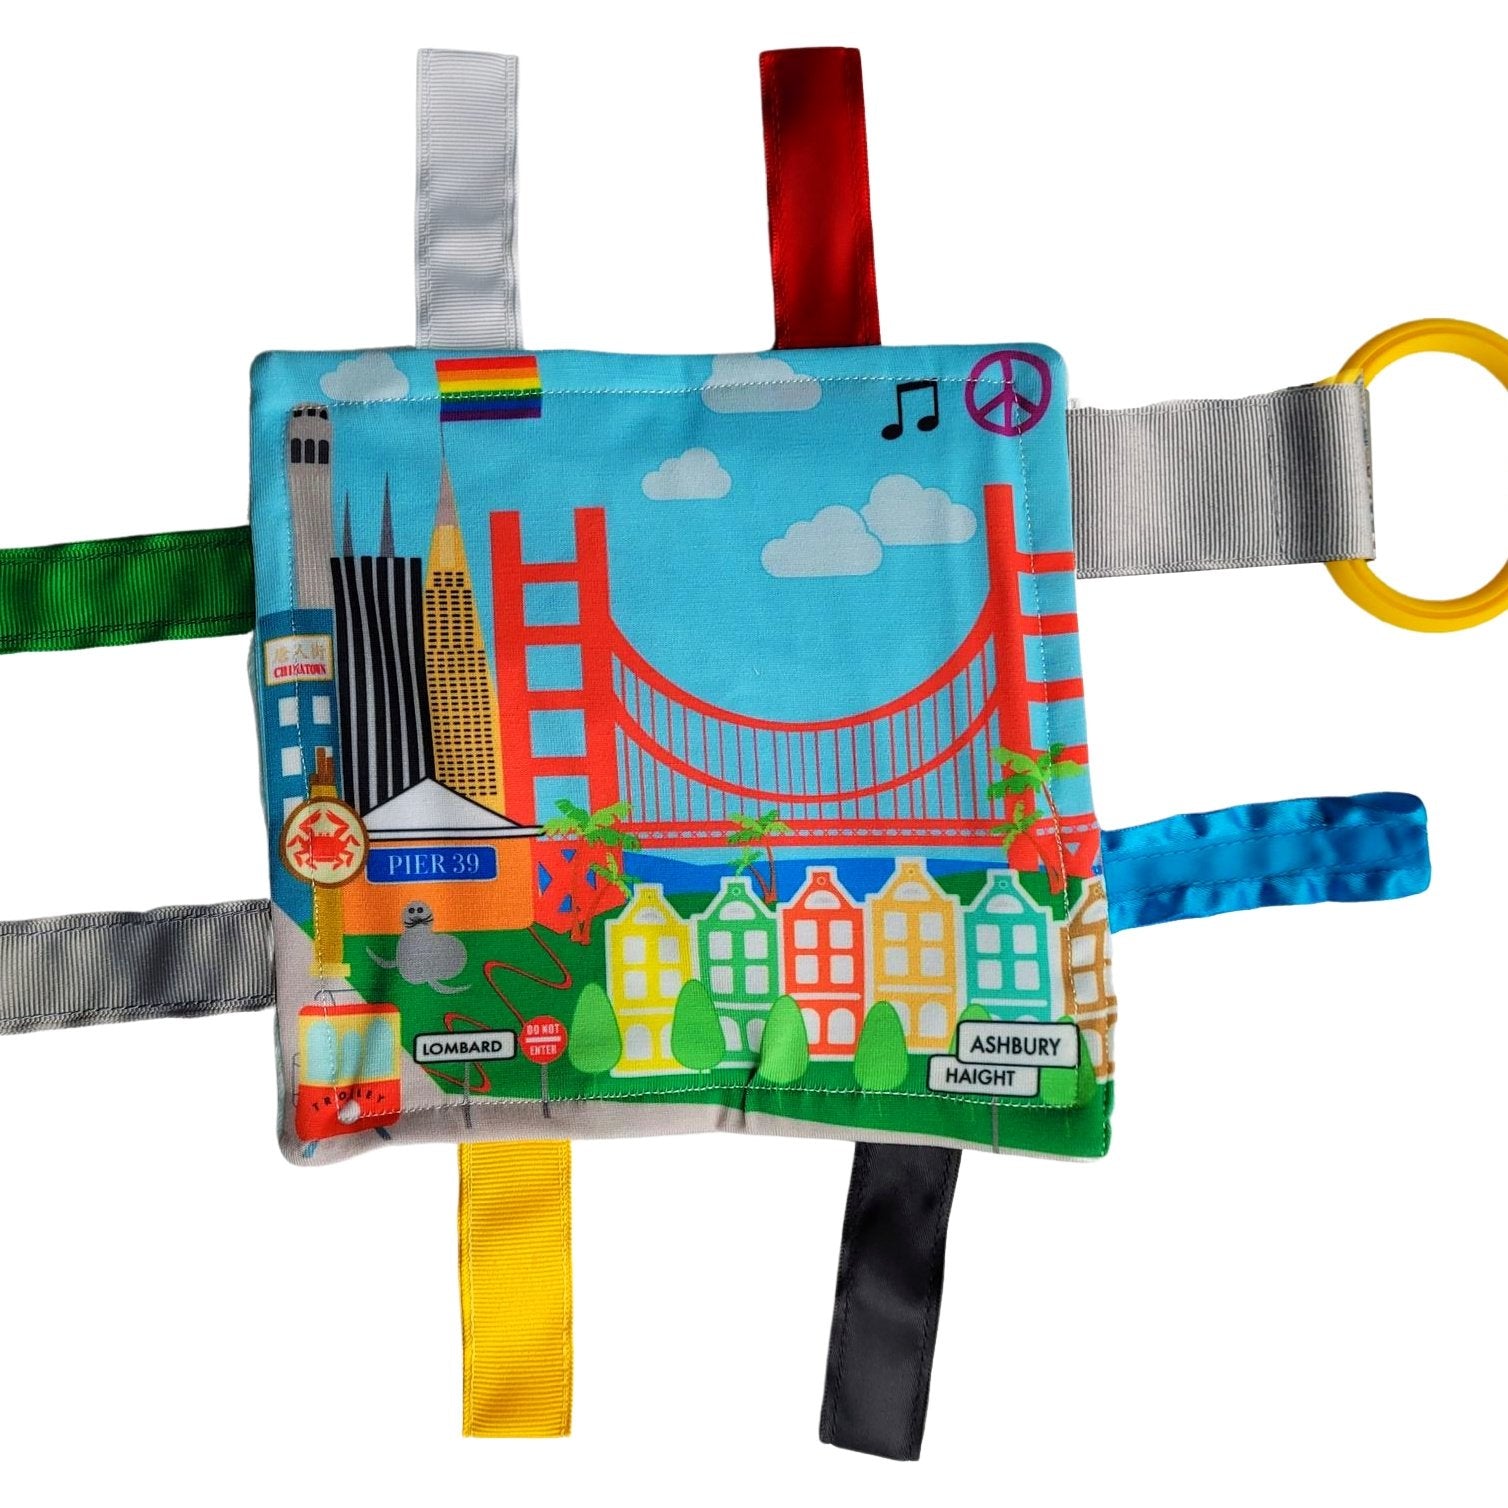 San Francisco, California - Baby City Learning Crinkle Squares 8